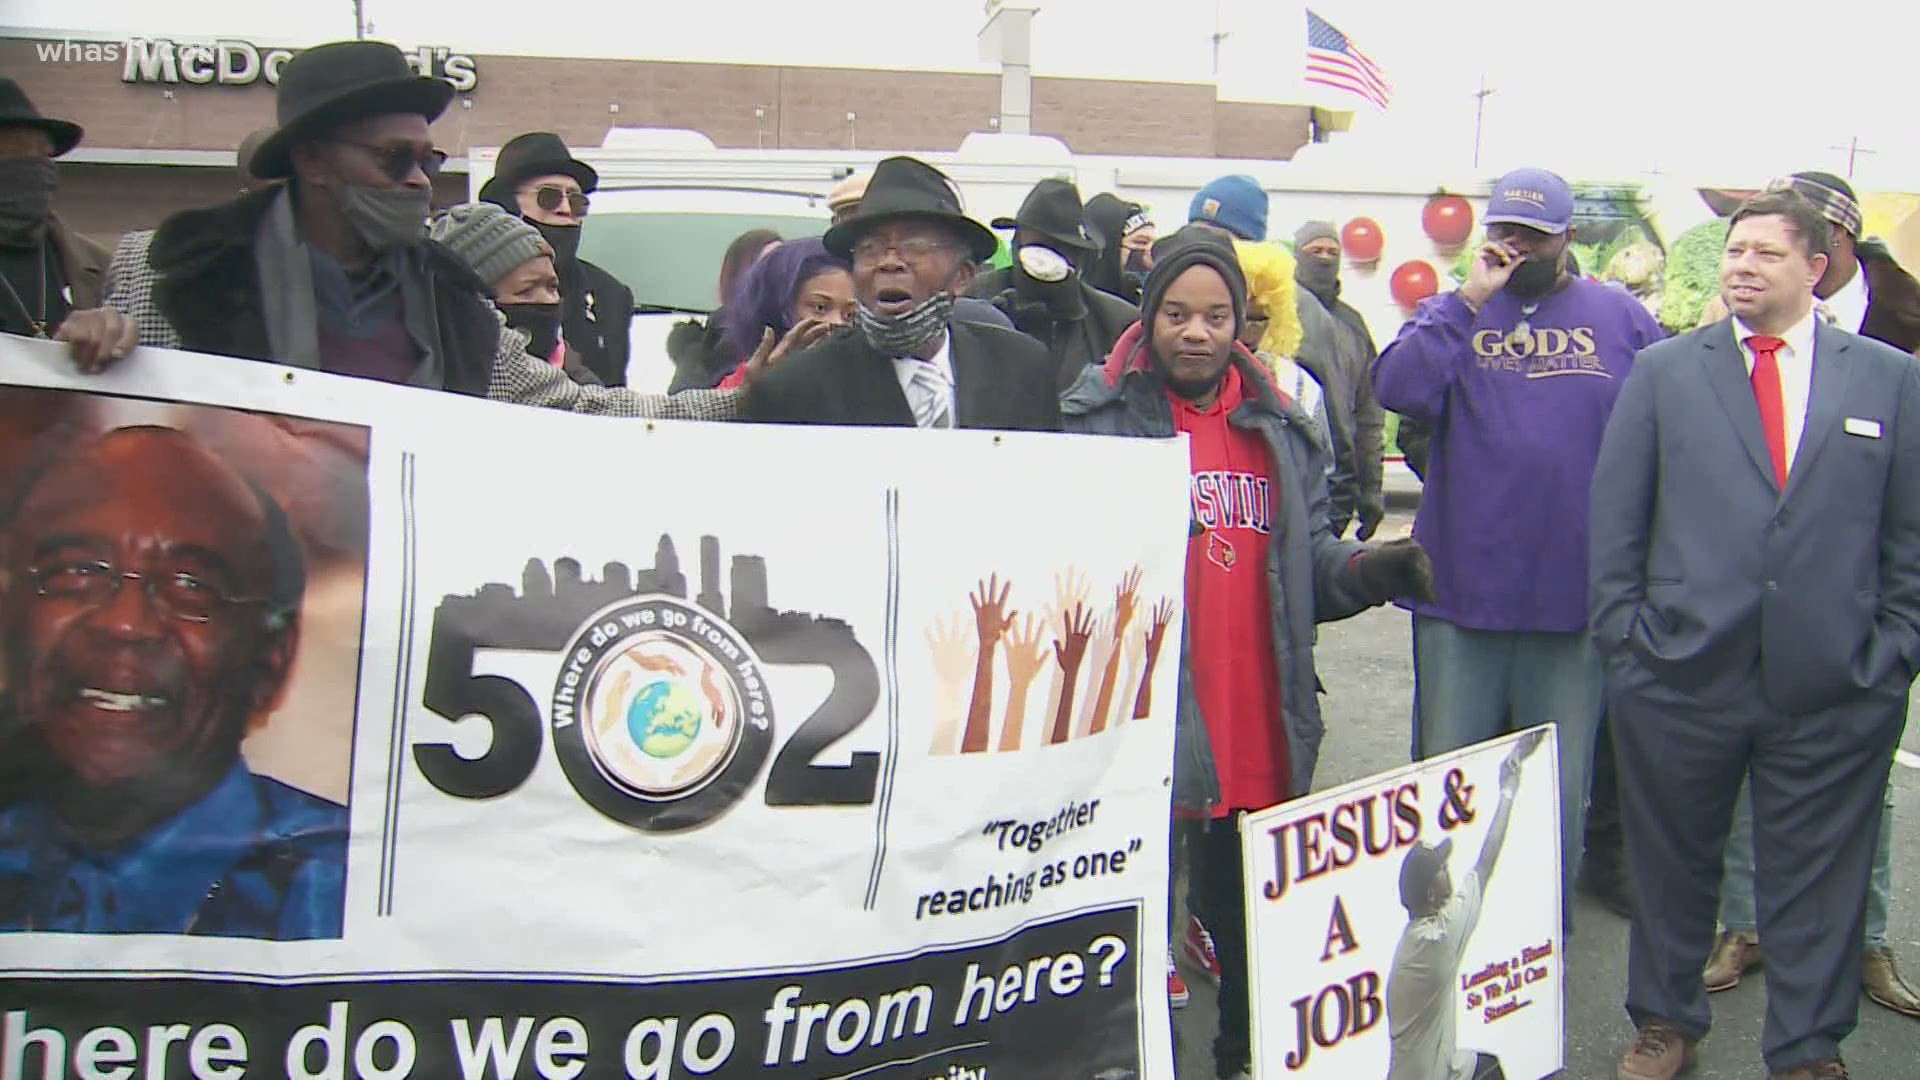 Events were held around Louisville to celebrate the life of Dr. King. While most of these events went virtual, there was one group that braved the cold.